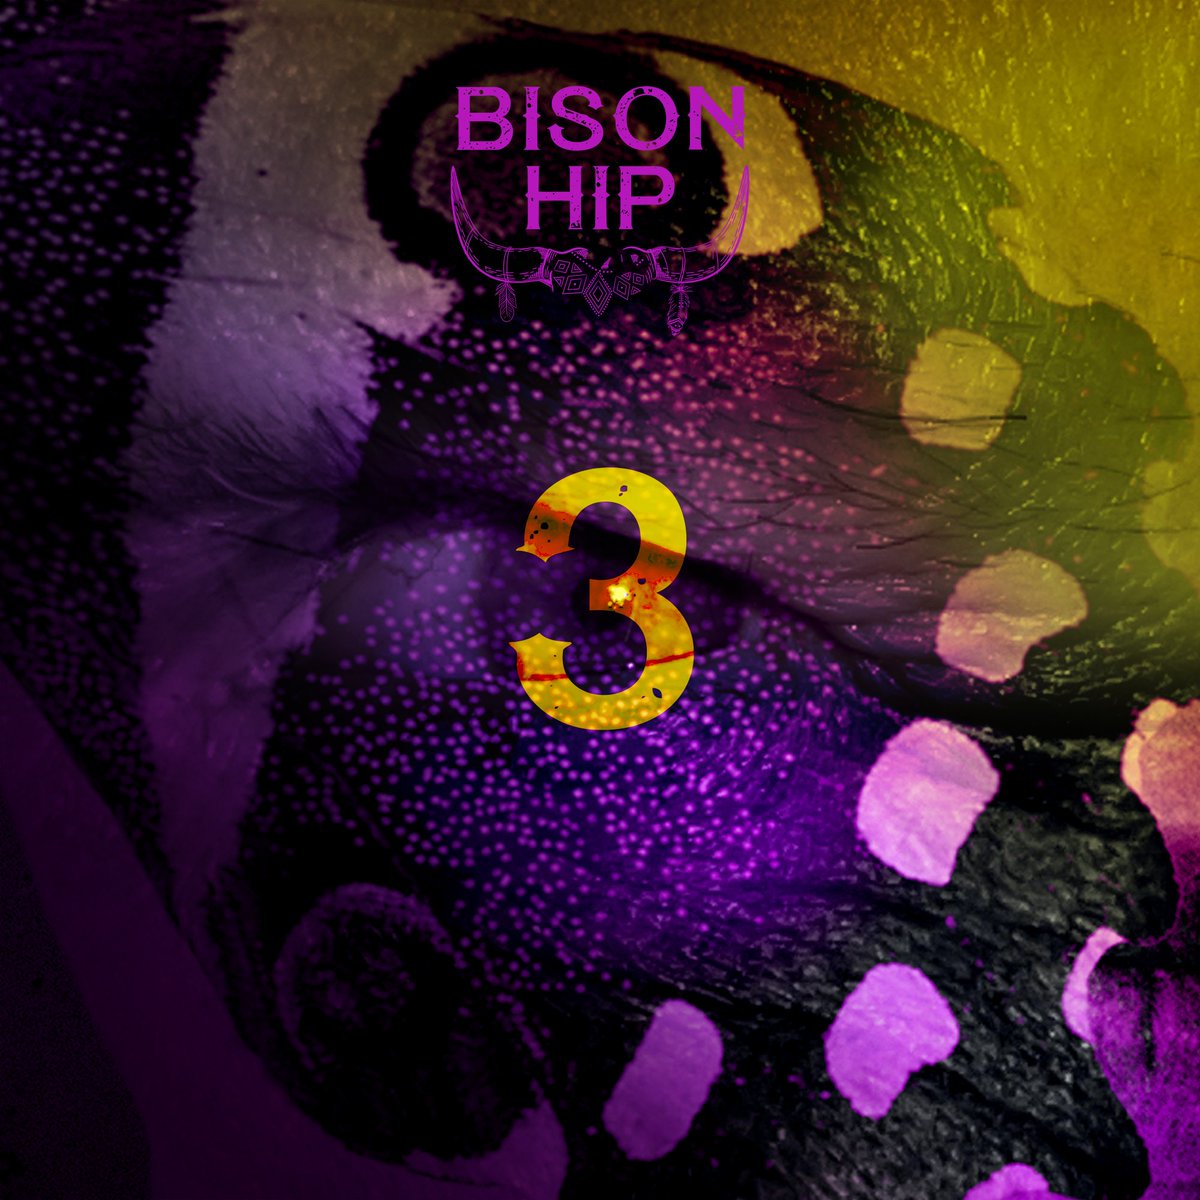 Album Pre-order Friday, ONLY 3 DAYS⚡️BRAND NEW SINGLE ⚡️ “PARASITE” out Friday! 💜💜 💜 🦬🦬🦬 For ticket info on our live shows: bisonhip.com/events/all-eve… #newmusic #blues #parasite #w2troyl #SolidEntertainments #MusicFestival #BluesMusic